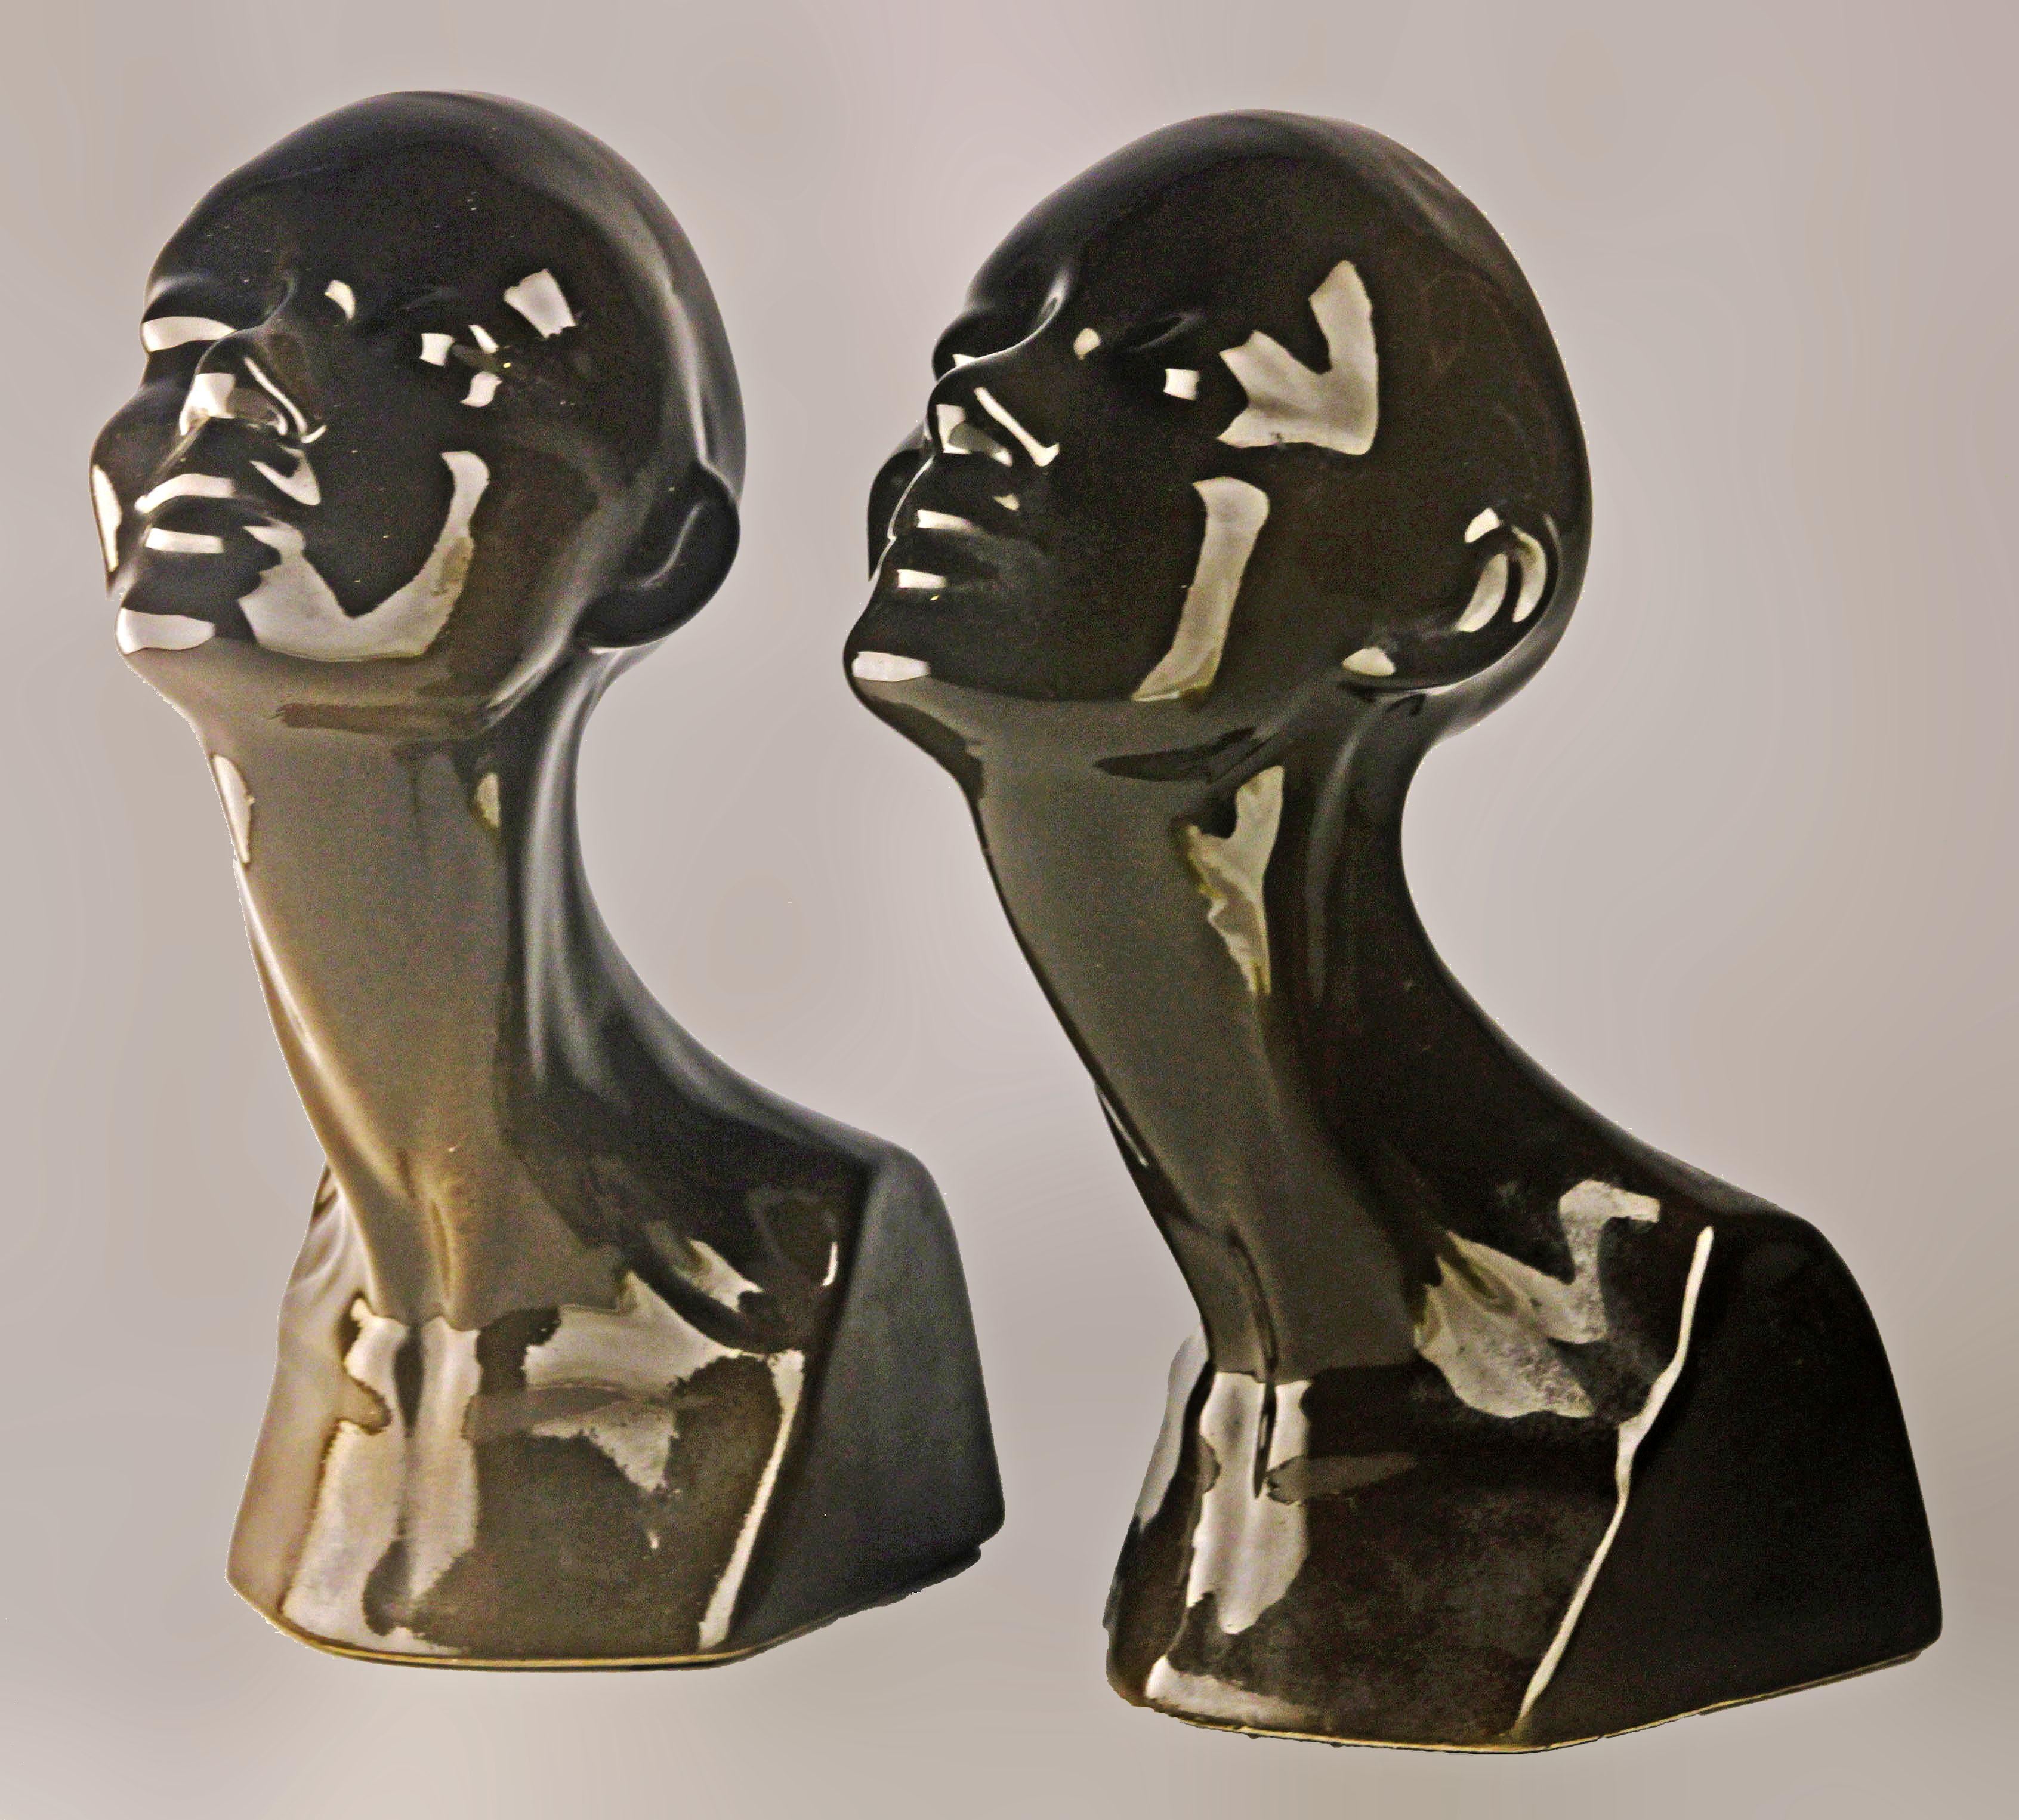 Post-Modern Pair of Late 20th Century French Enameled Glazed Black Ceramic Women Busts/Heads For Sale